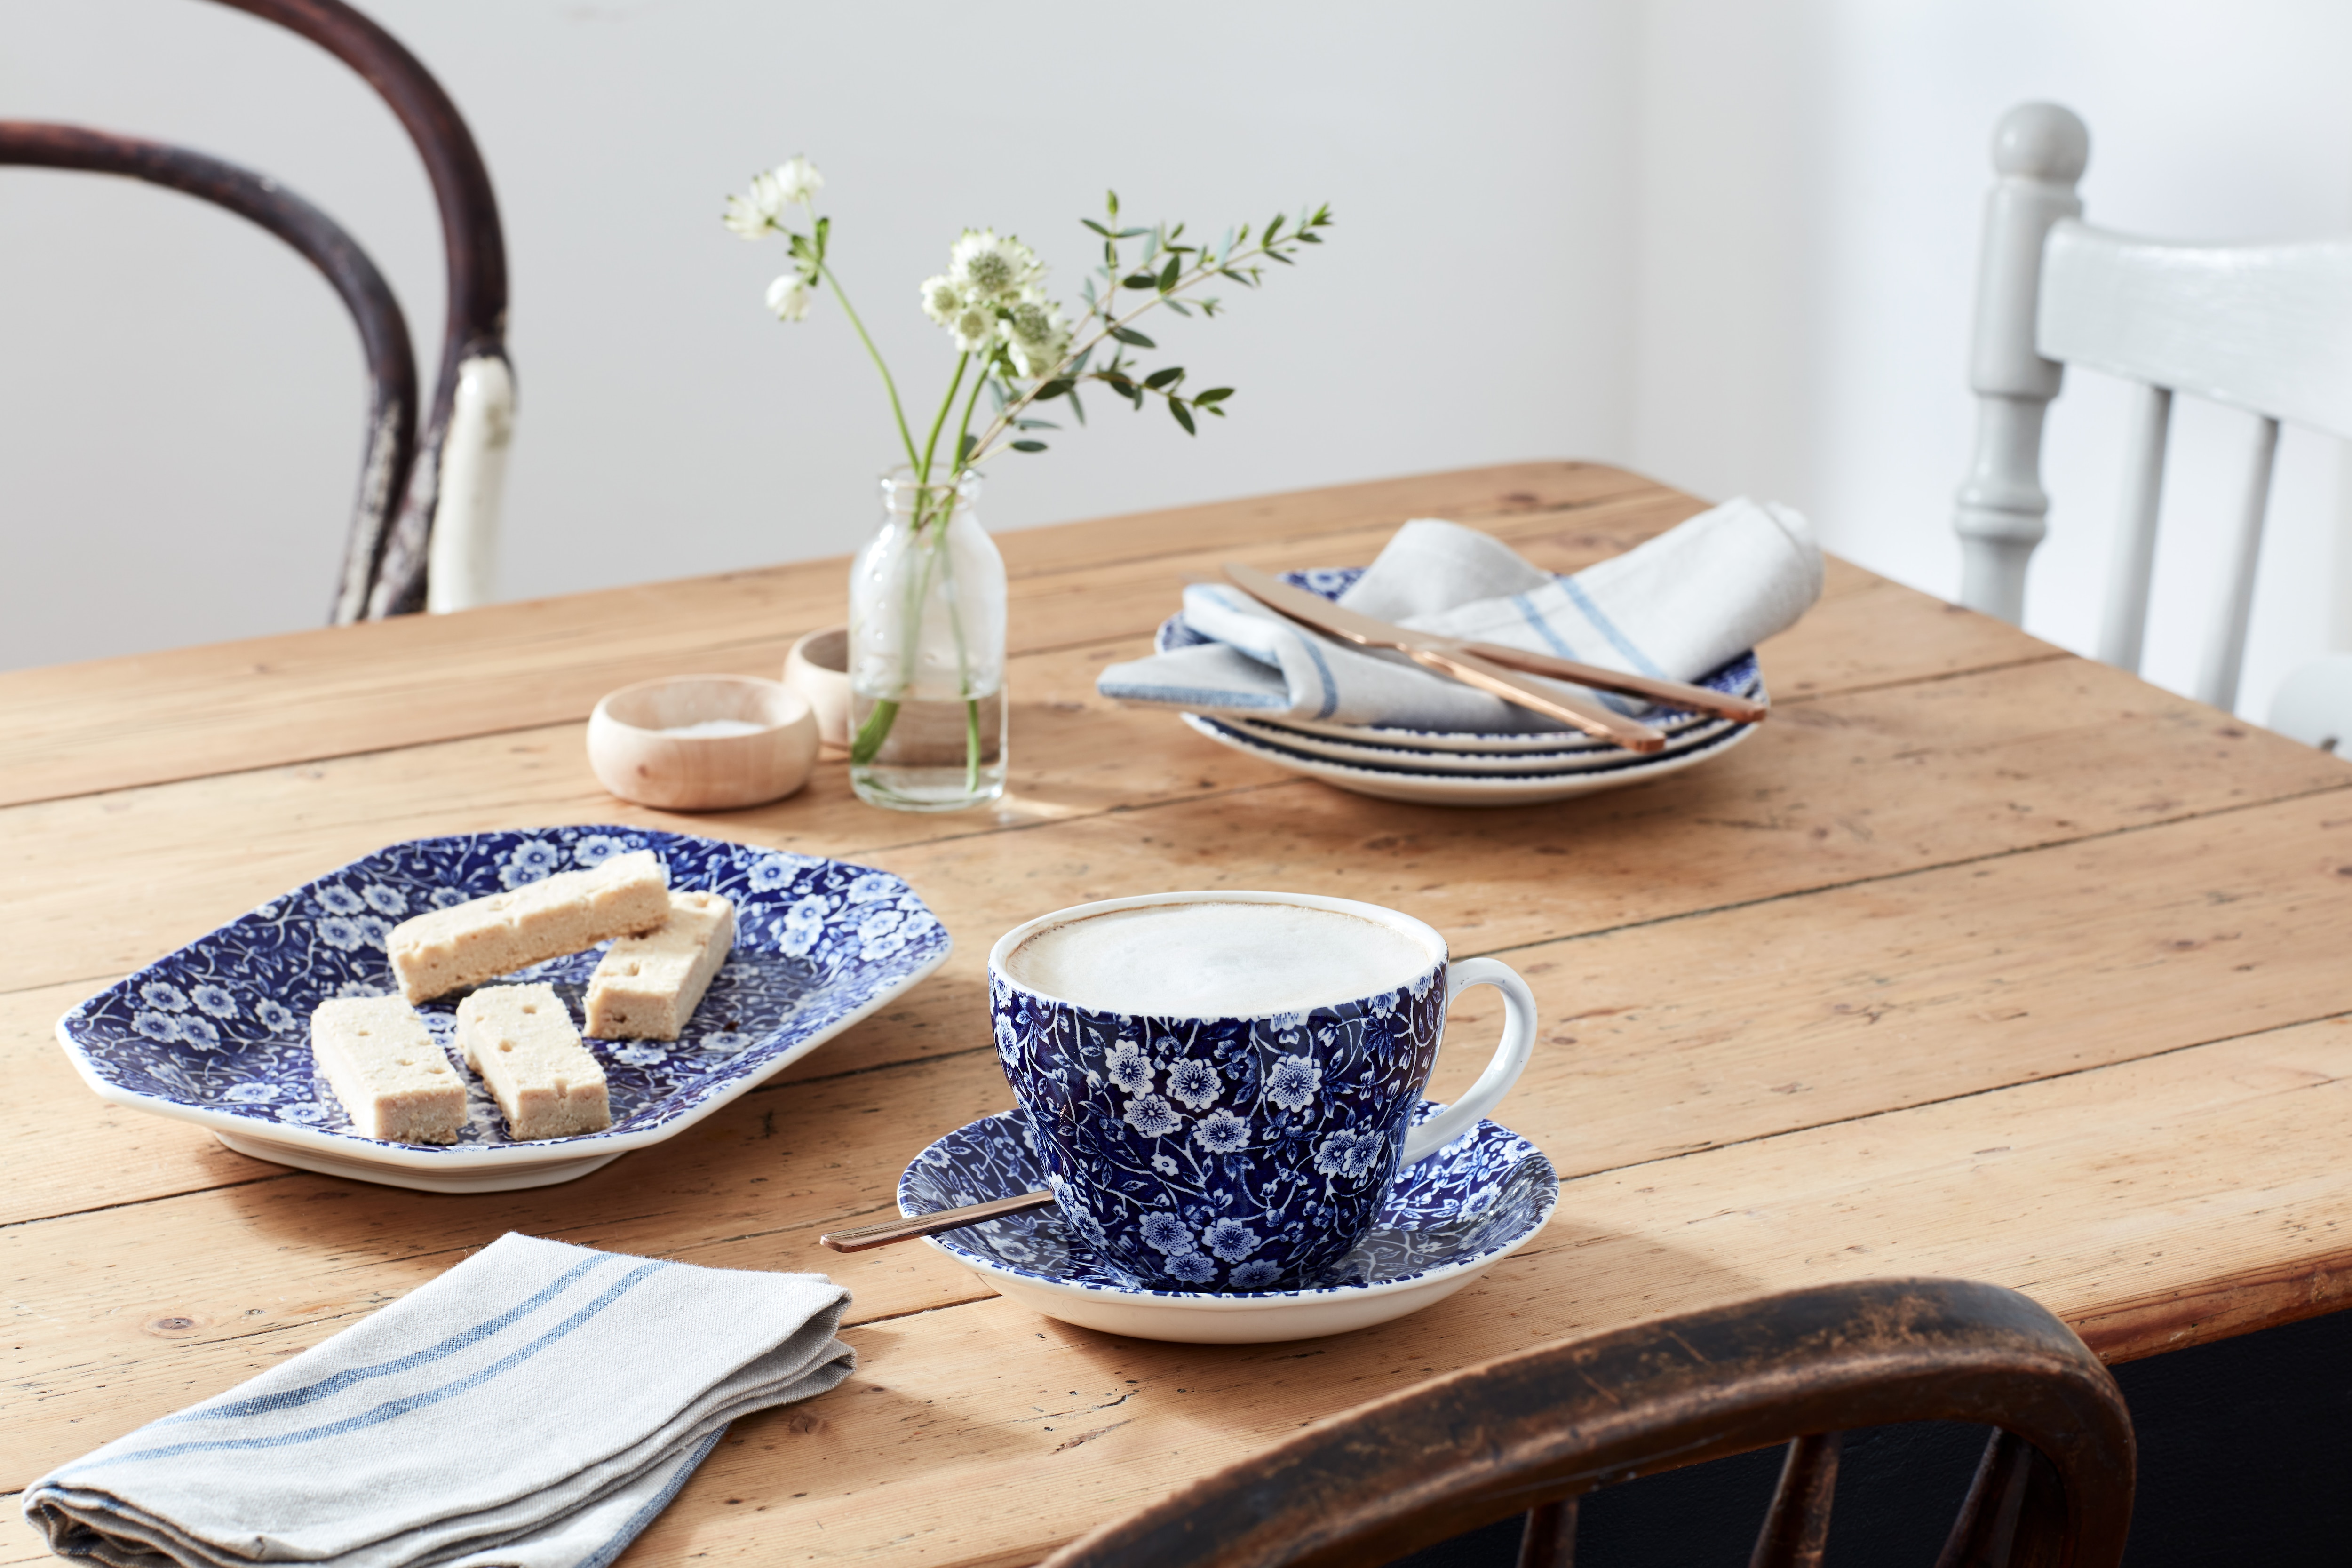 https://www.denbypottery.com/file/v2012747113121922863/general/Burleigh%20Blue%20Calico%20-%20coffee%20and%20biscuits.jpg